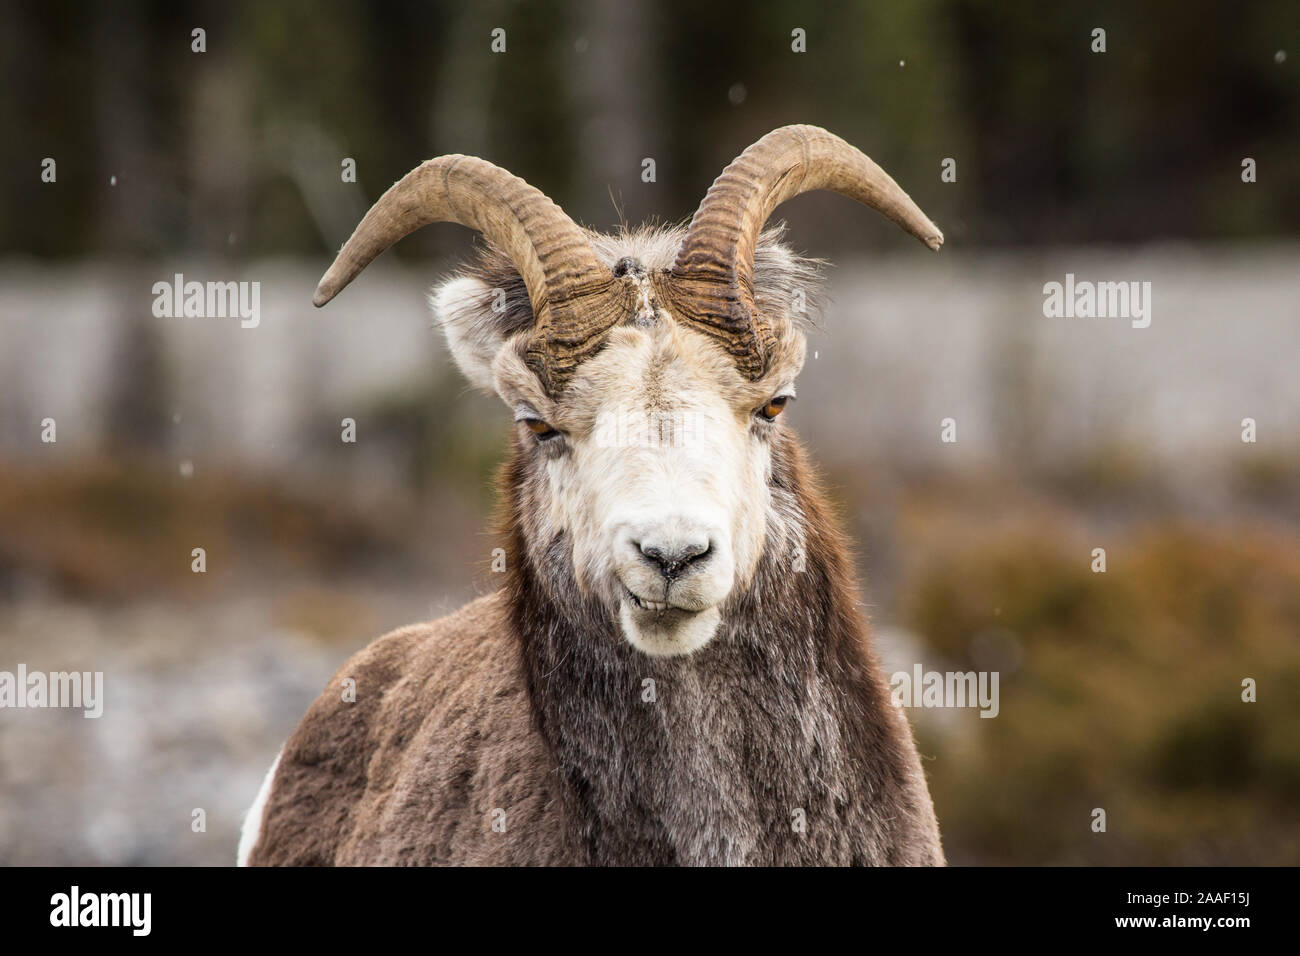 Bighorn Sheep mountain goat ewe making a funny face looking into camera in Southern Canada near Montana. Stock Photo